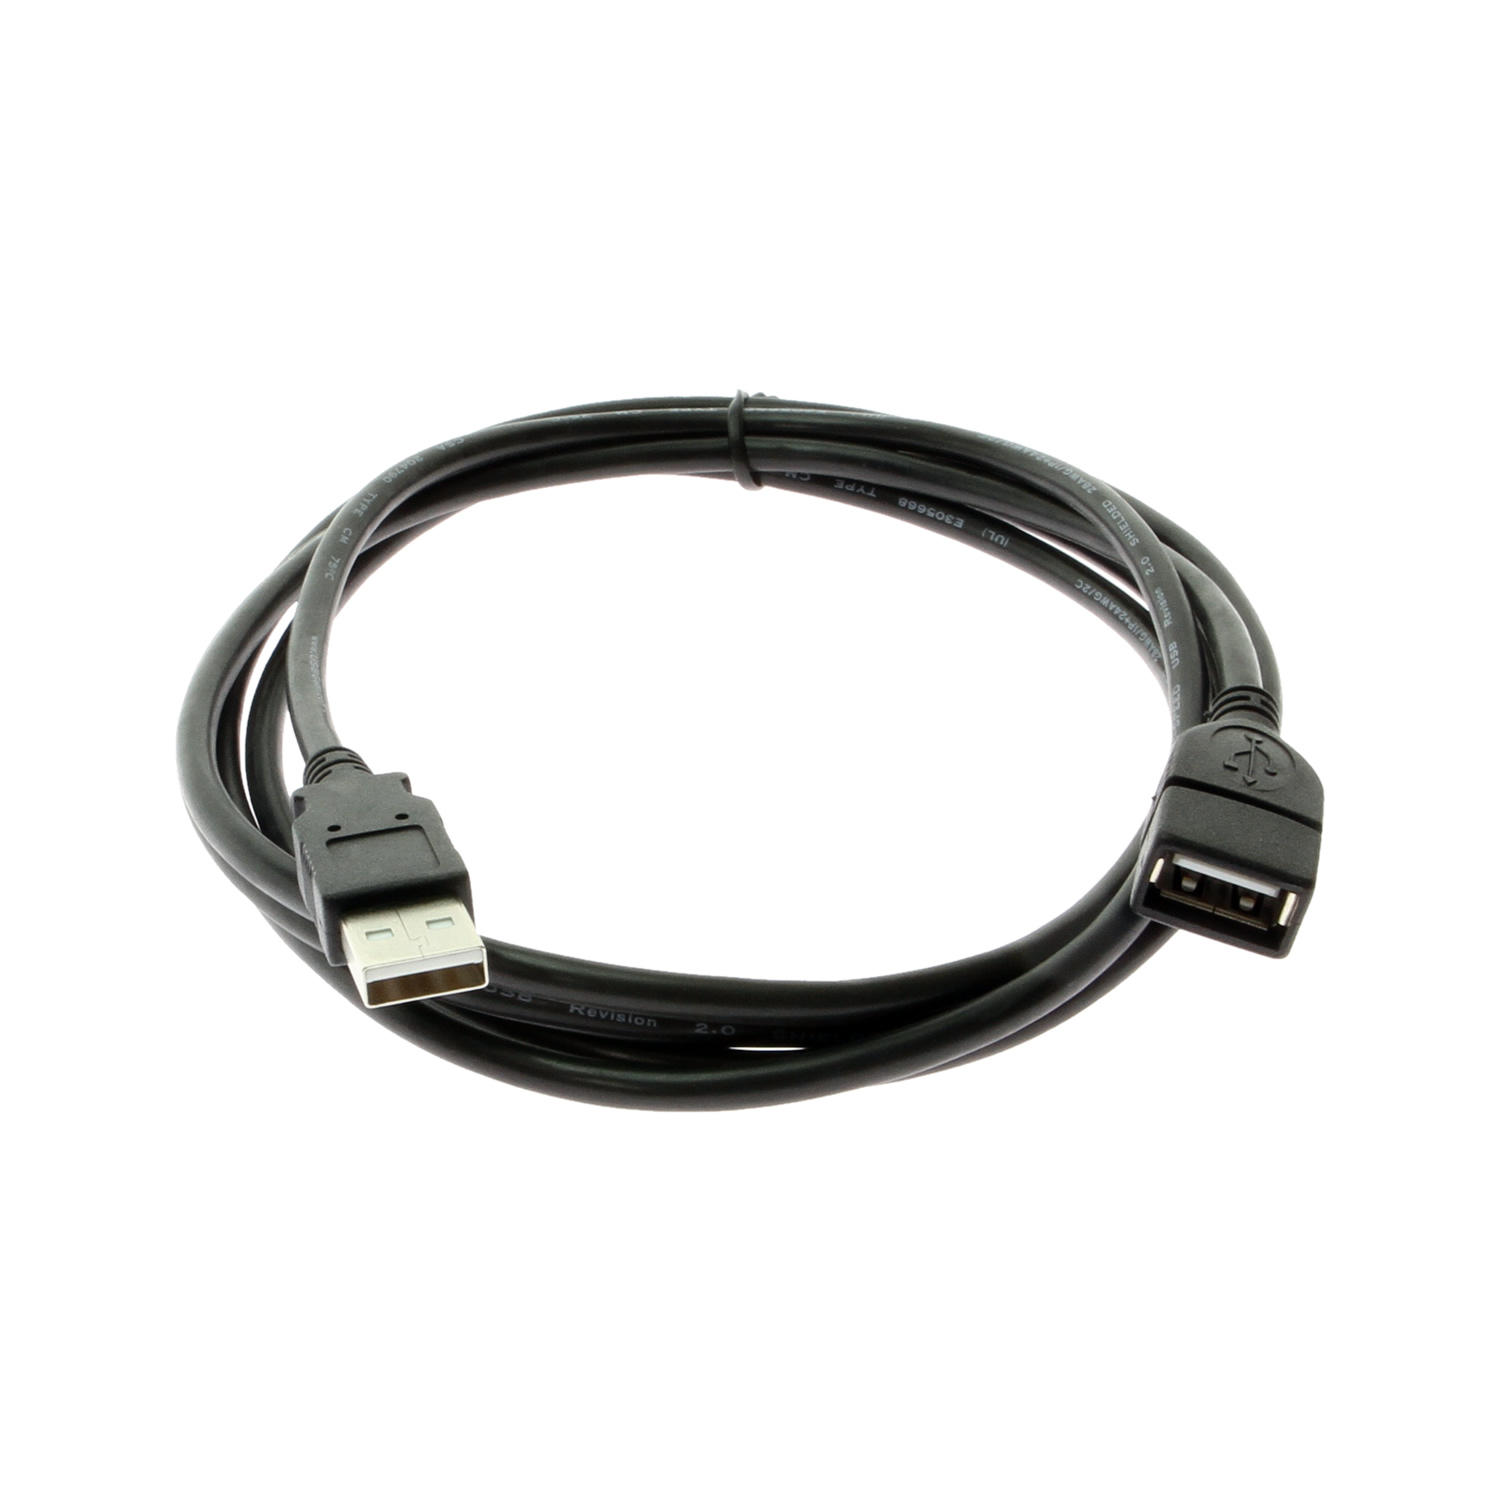 AWG USB 2.0 Hi-Speed A to A Extension Cable 6ft. Black